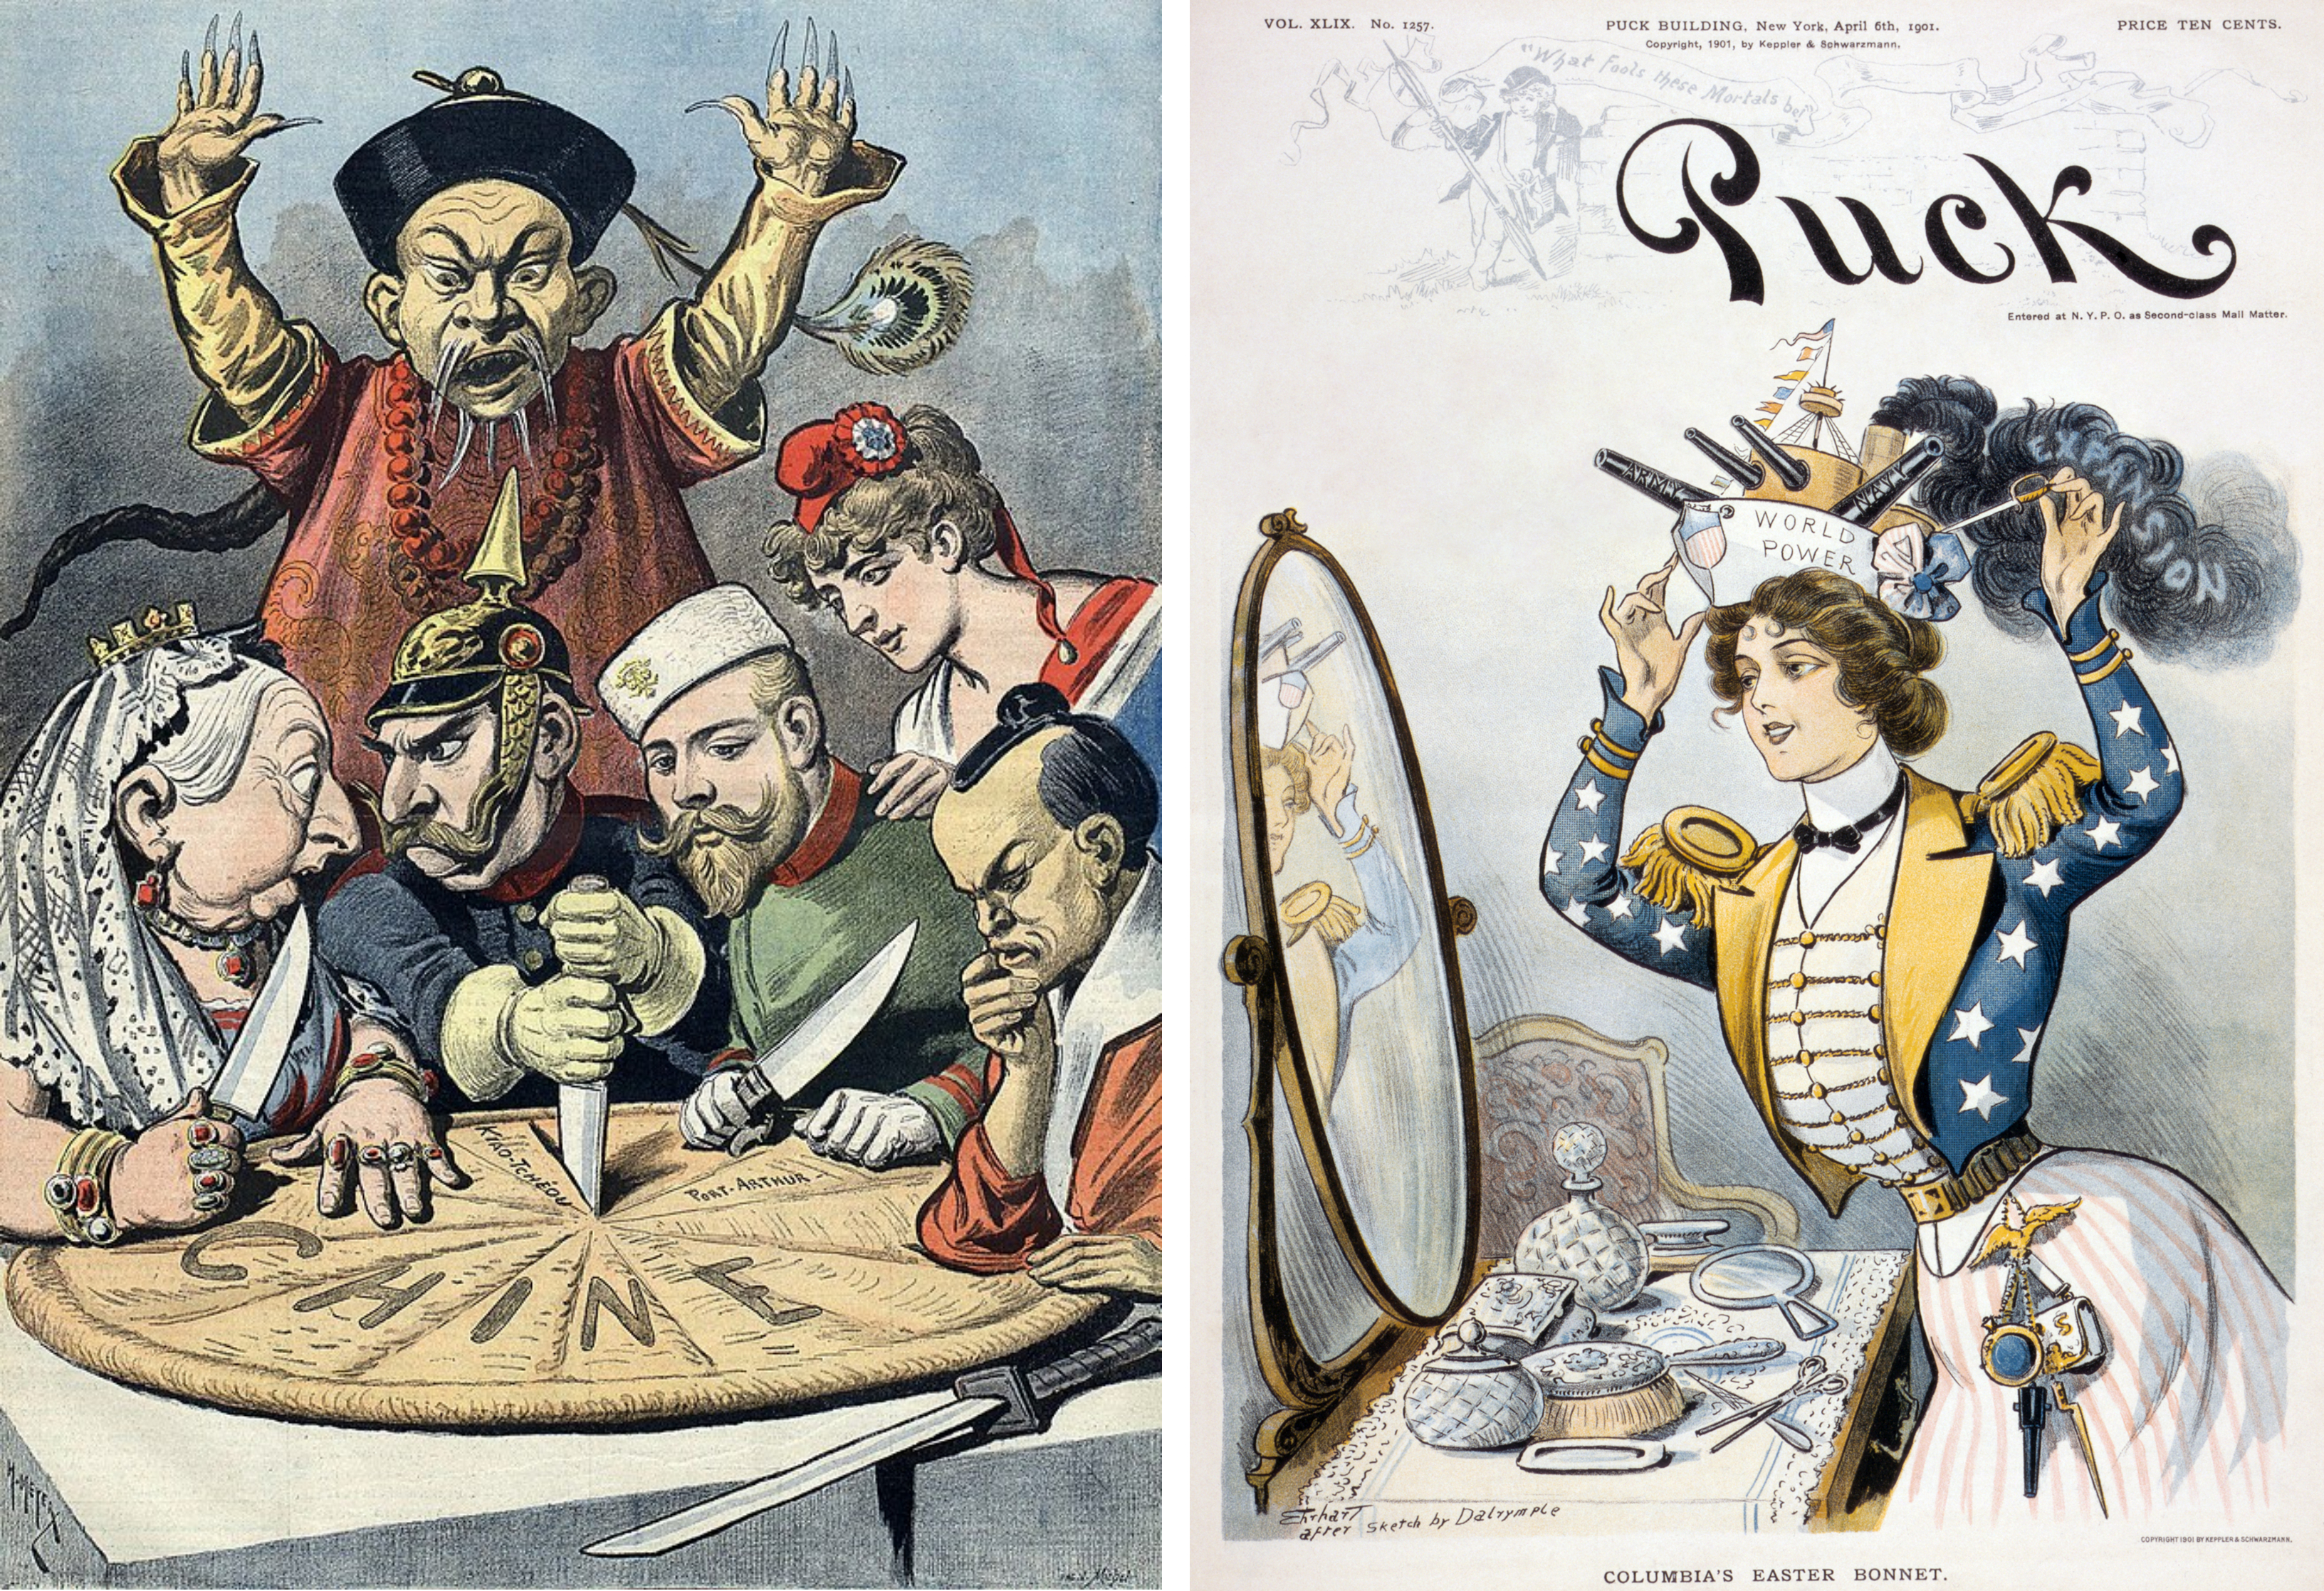 On the left, an 1898 French cartoon depicting England, Germany, Russia, France, and Japan dividing up China. On the right, a cartoon of Columbia, the personification of the United States, putting on a warship-shaped hat.